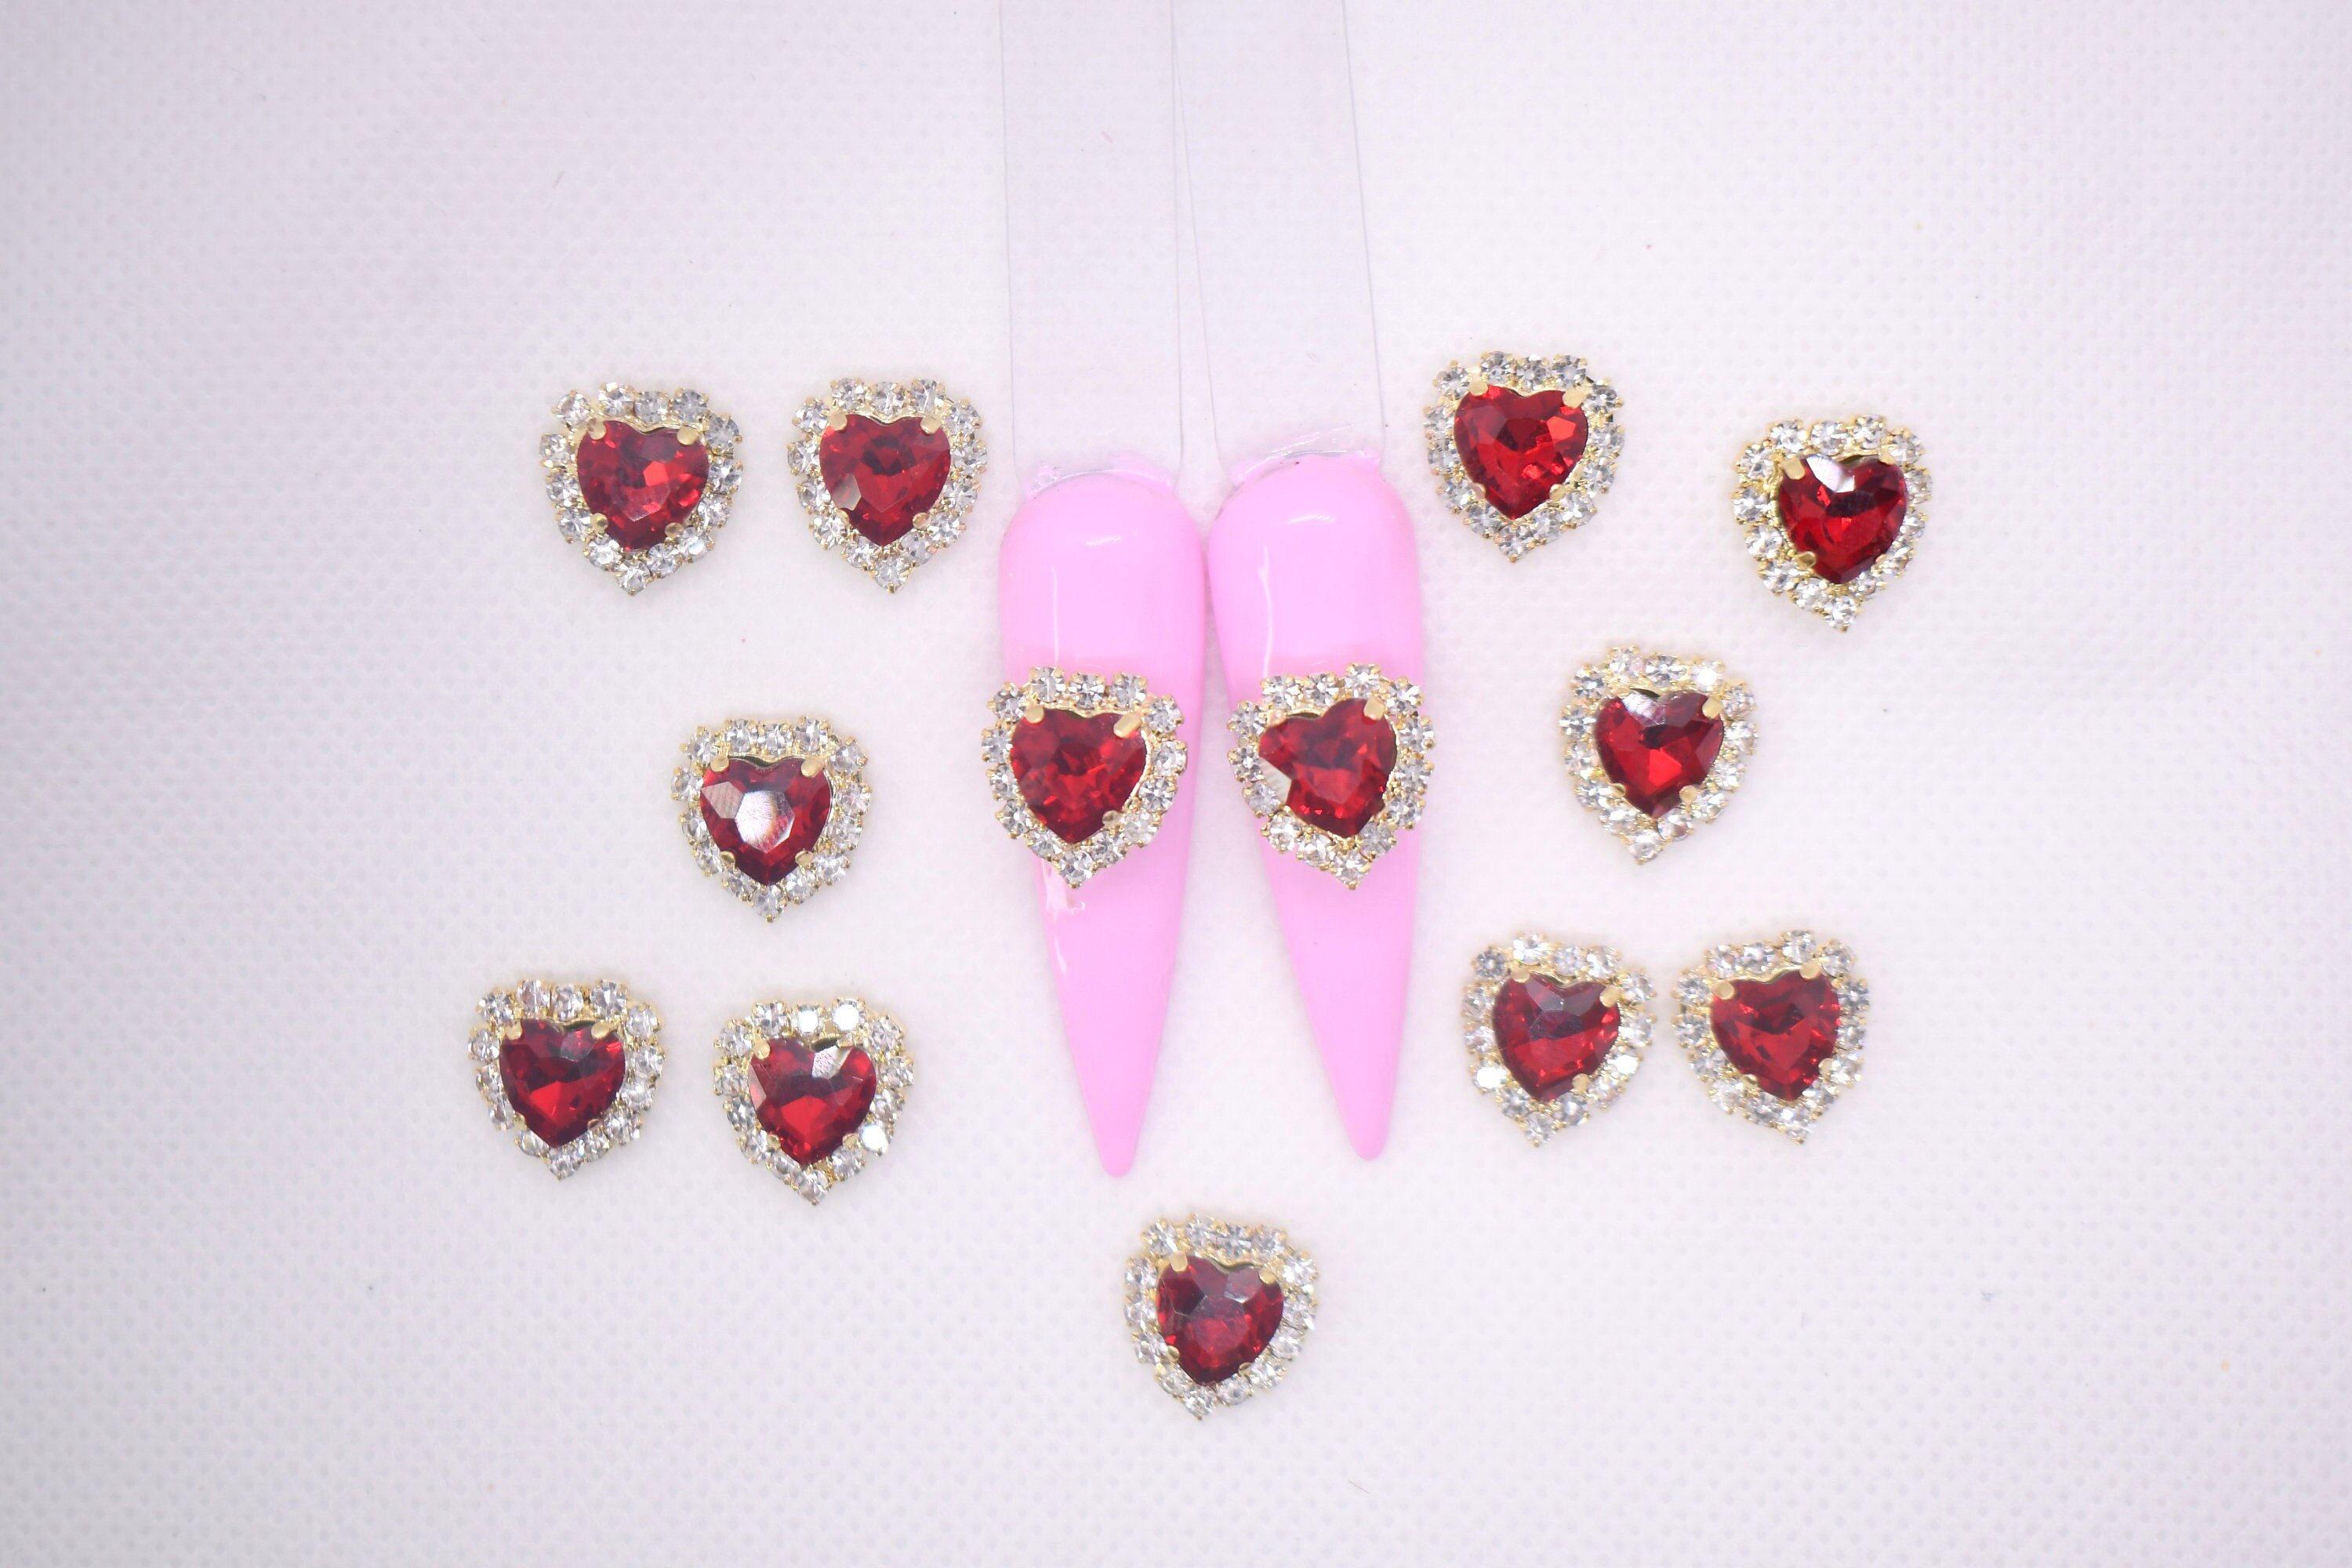 767 PCS Red Heart Nail Charm Love Nail Art Rhinestones Red Gold Round Beads  Flatback Drill Sparkly Gold Heart Stud for Nail Art Craft Clothes Shoes